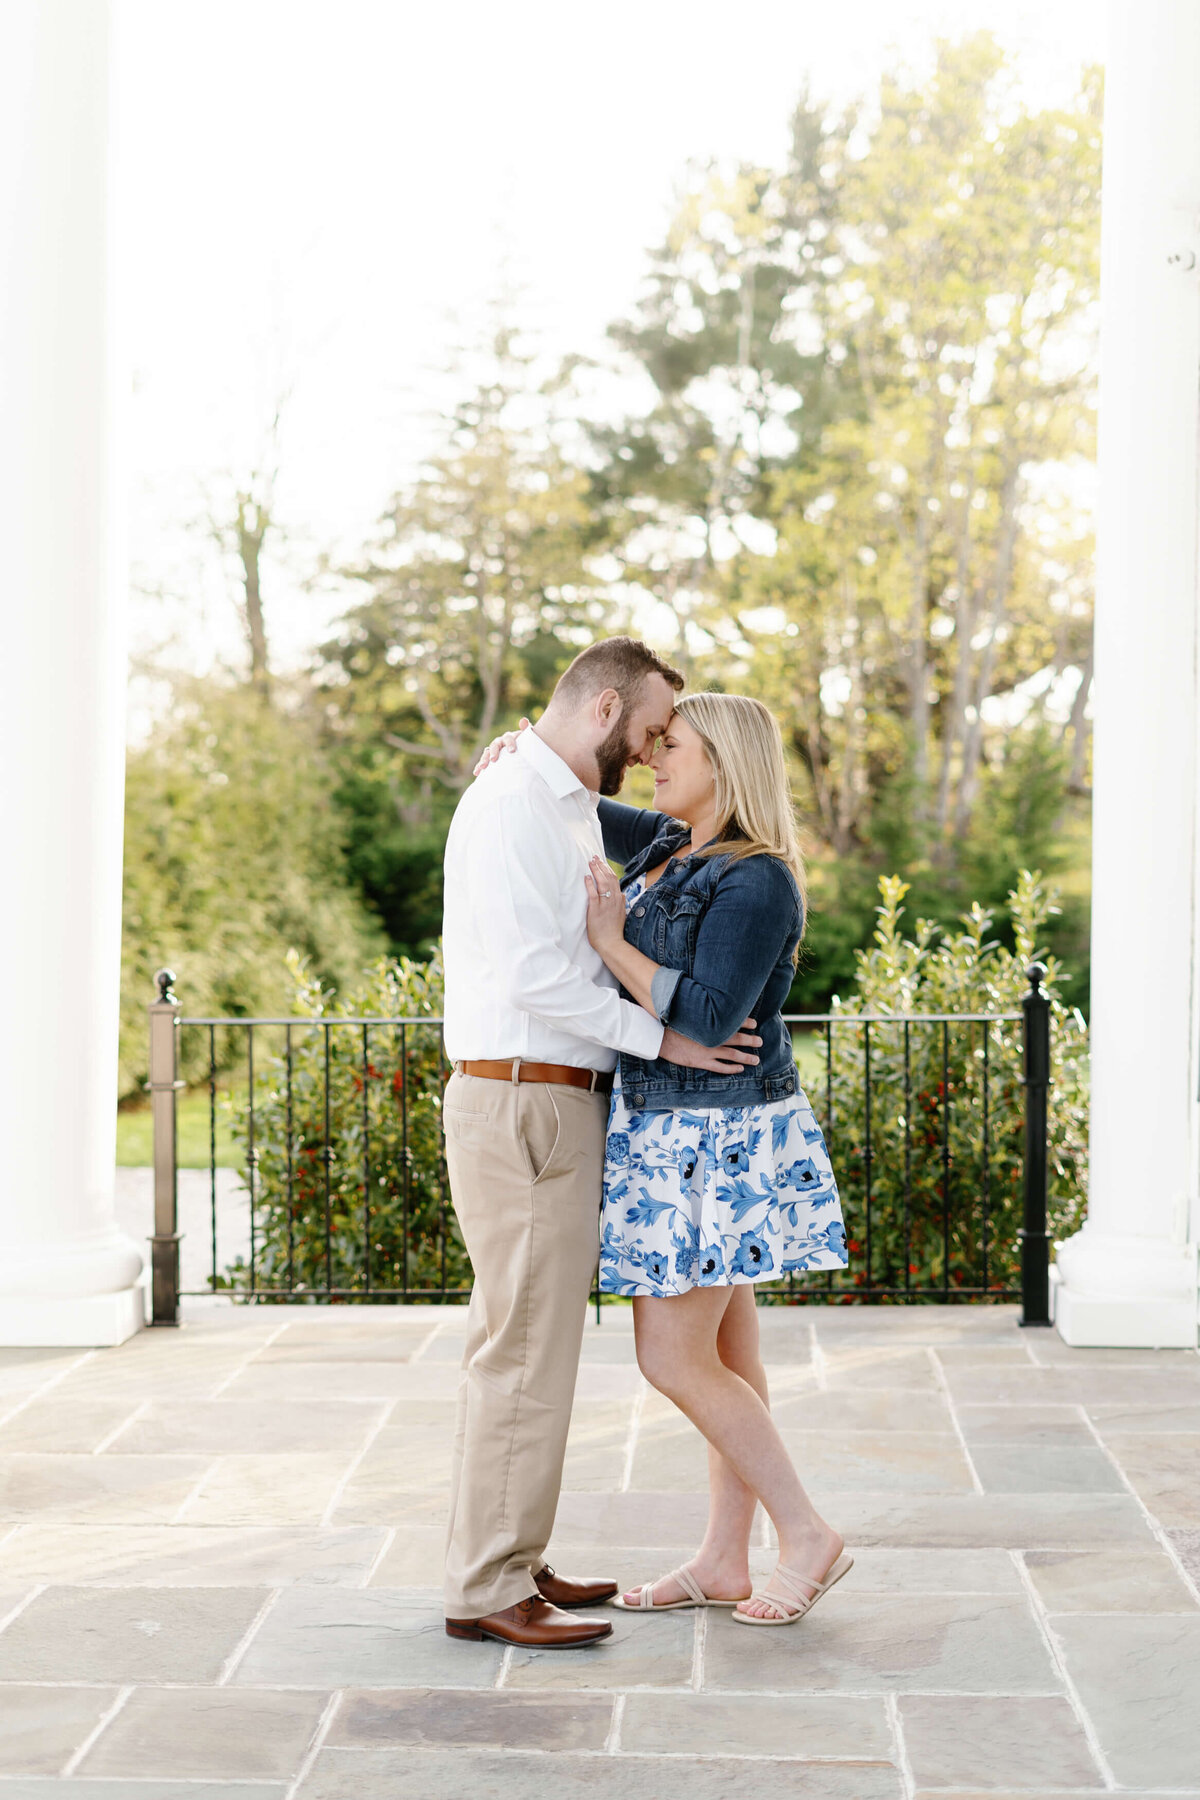 suffolk-county-engagement-photographer-009